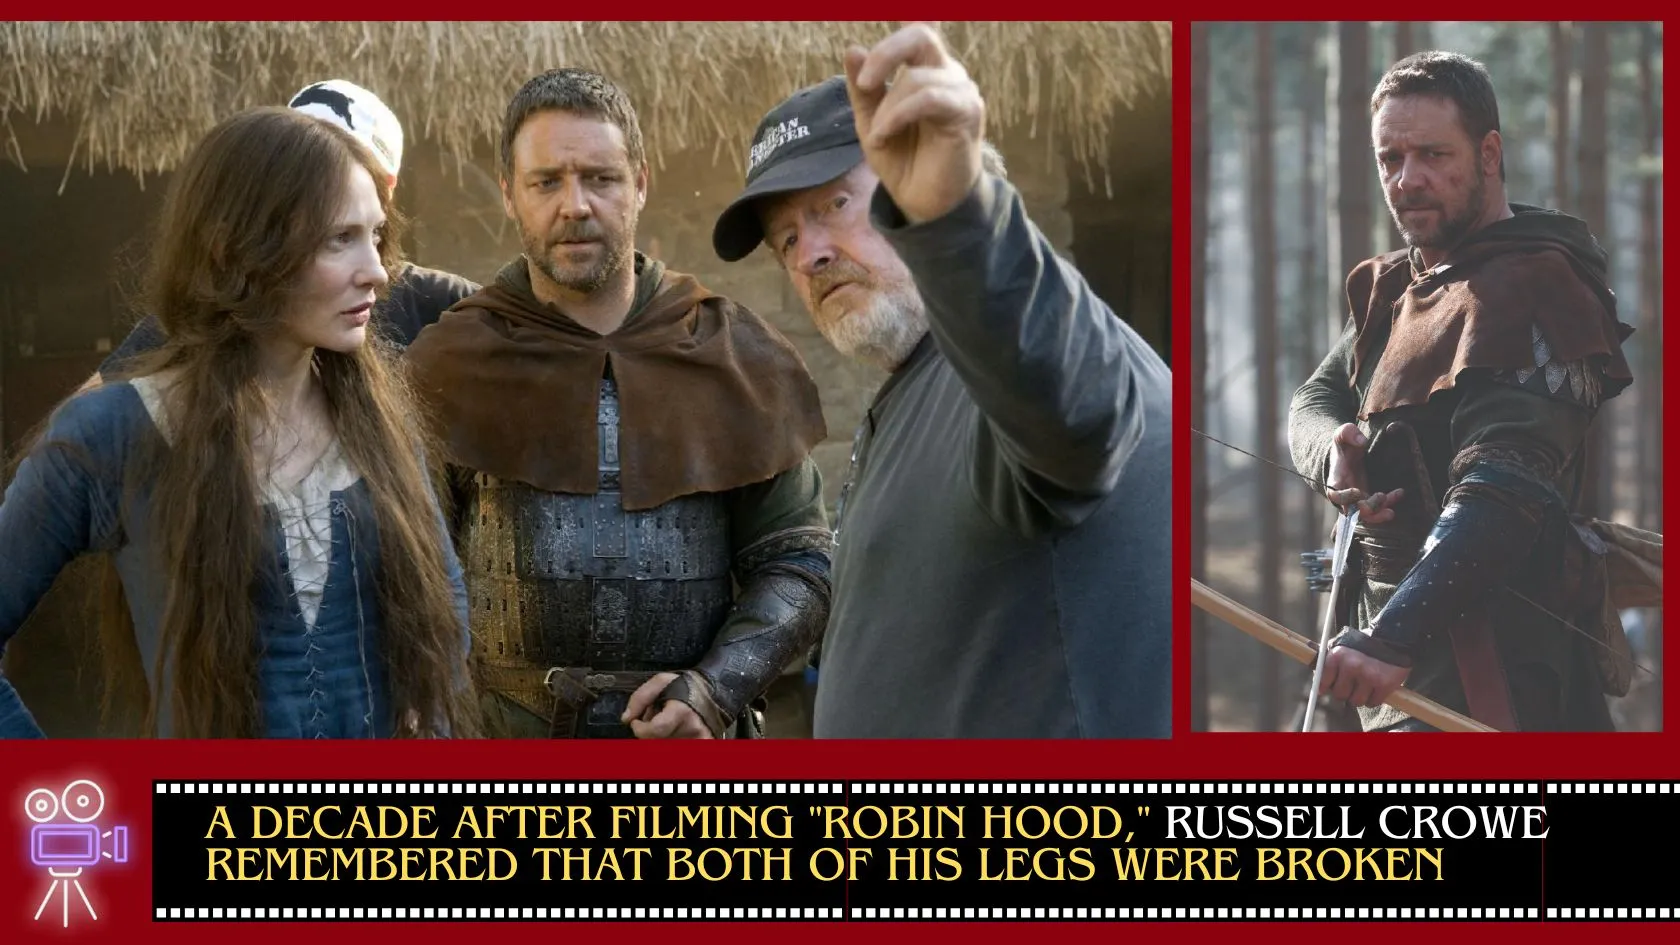 A decade after filming _Robin Hood,_ Russell Crowe remembered that both of his legs were broken